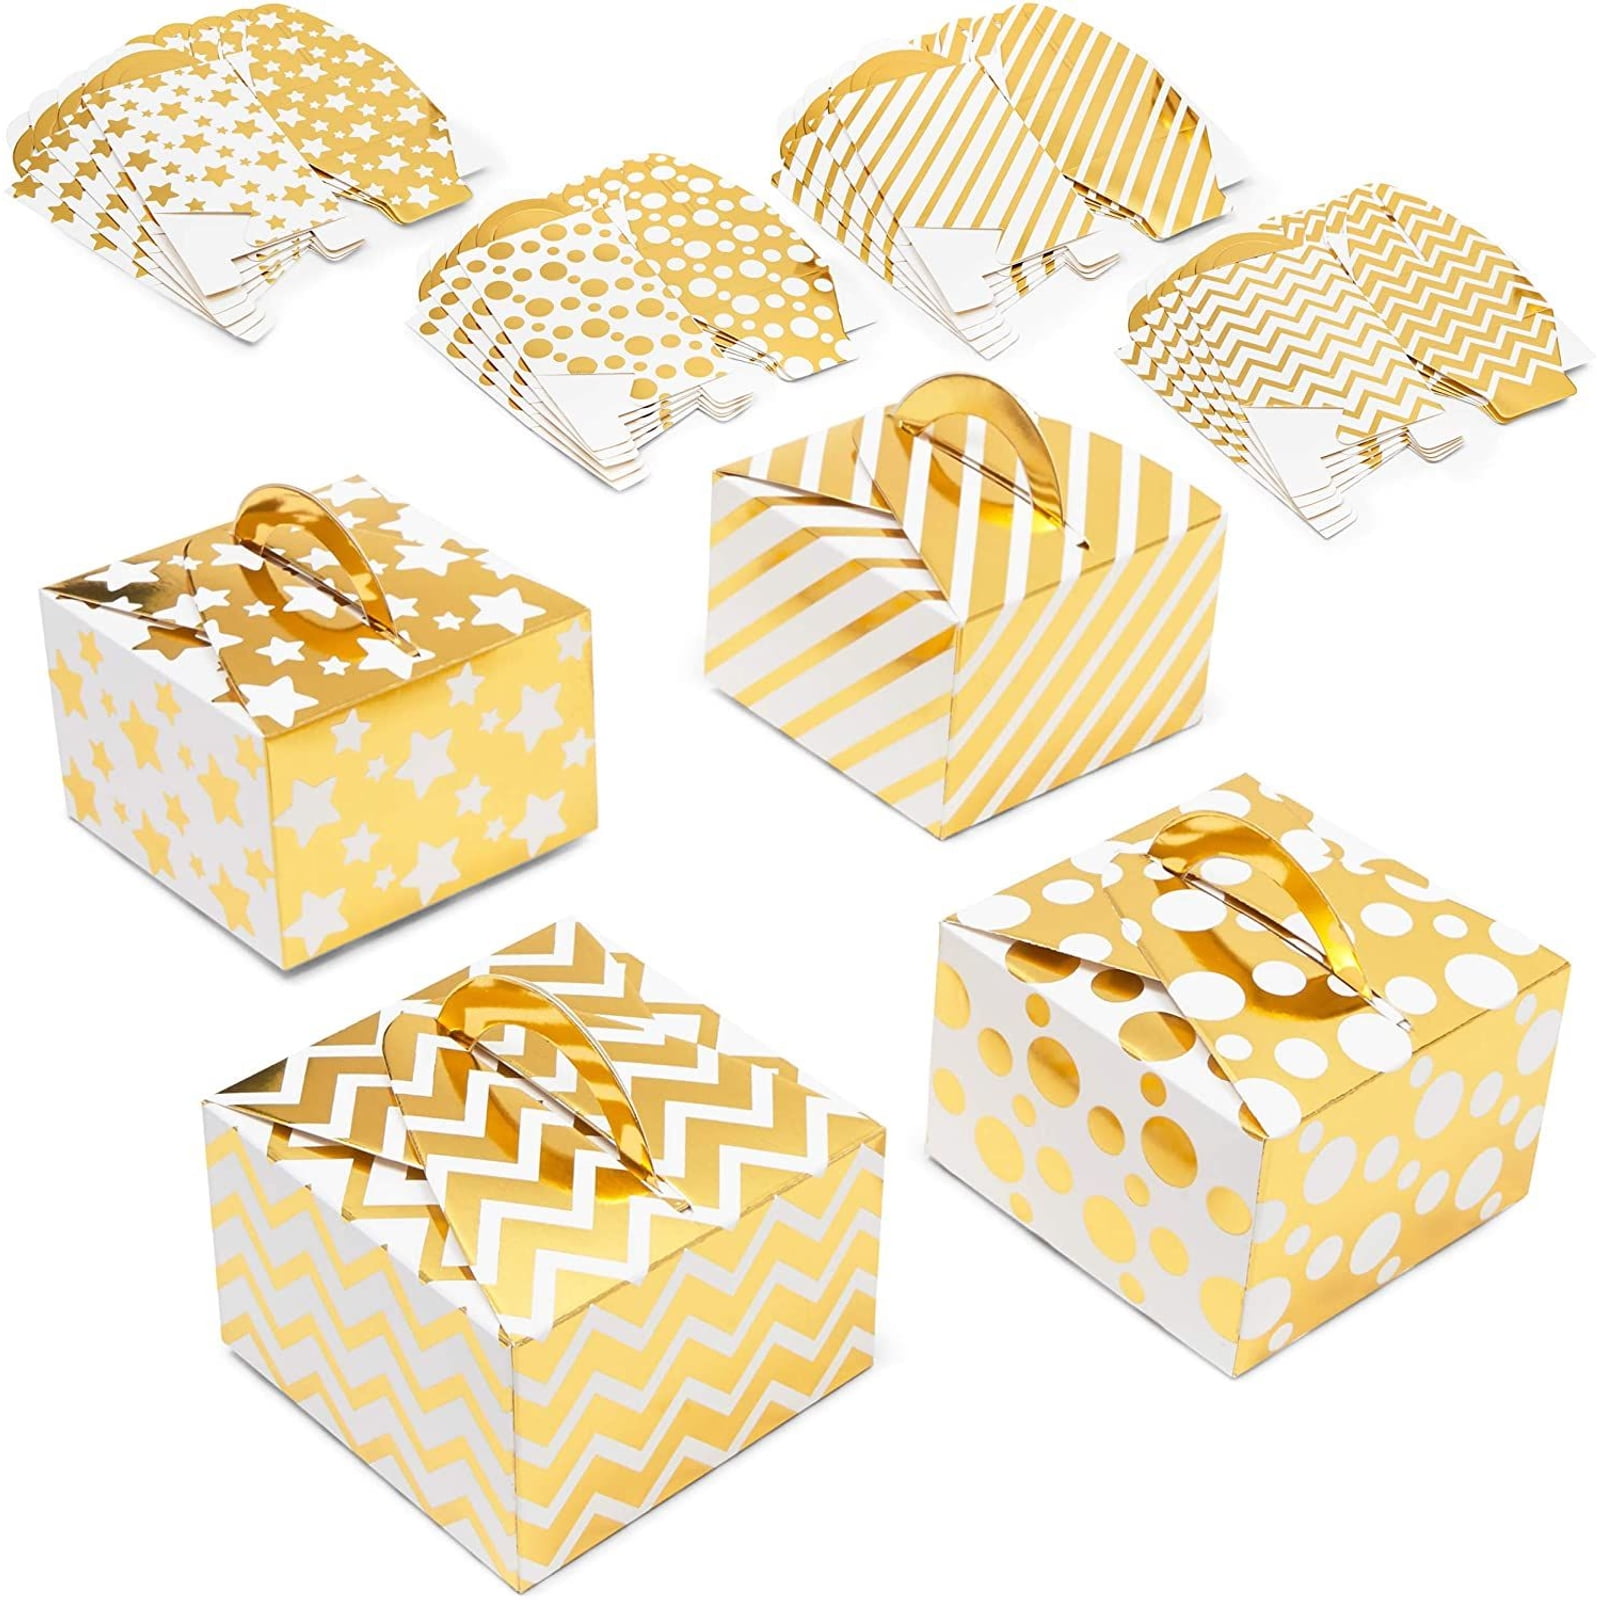 NEW LOT OF 50 GOLD FOIL CARDBOARD GLOSSY PEN GIFT BOX